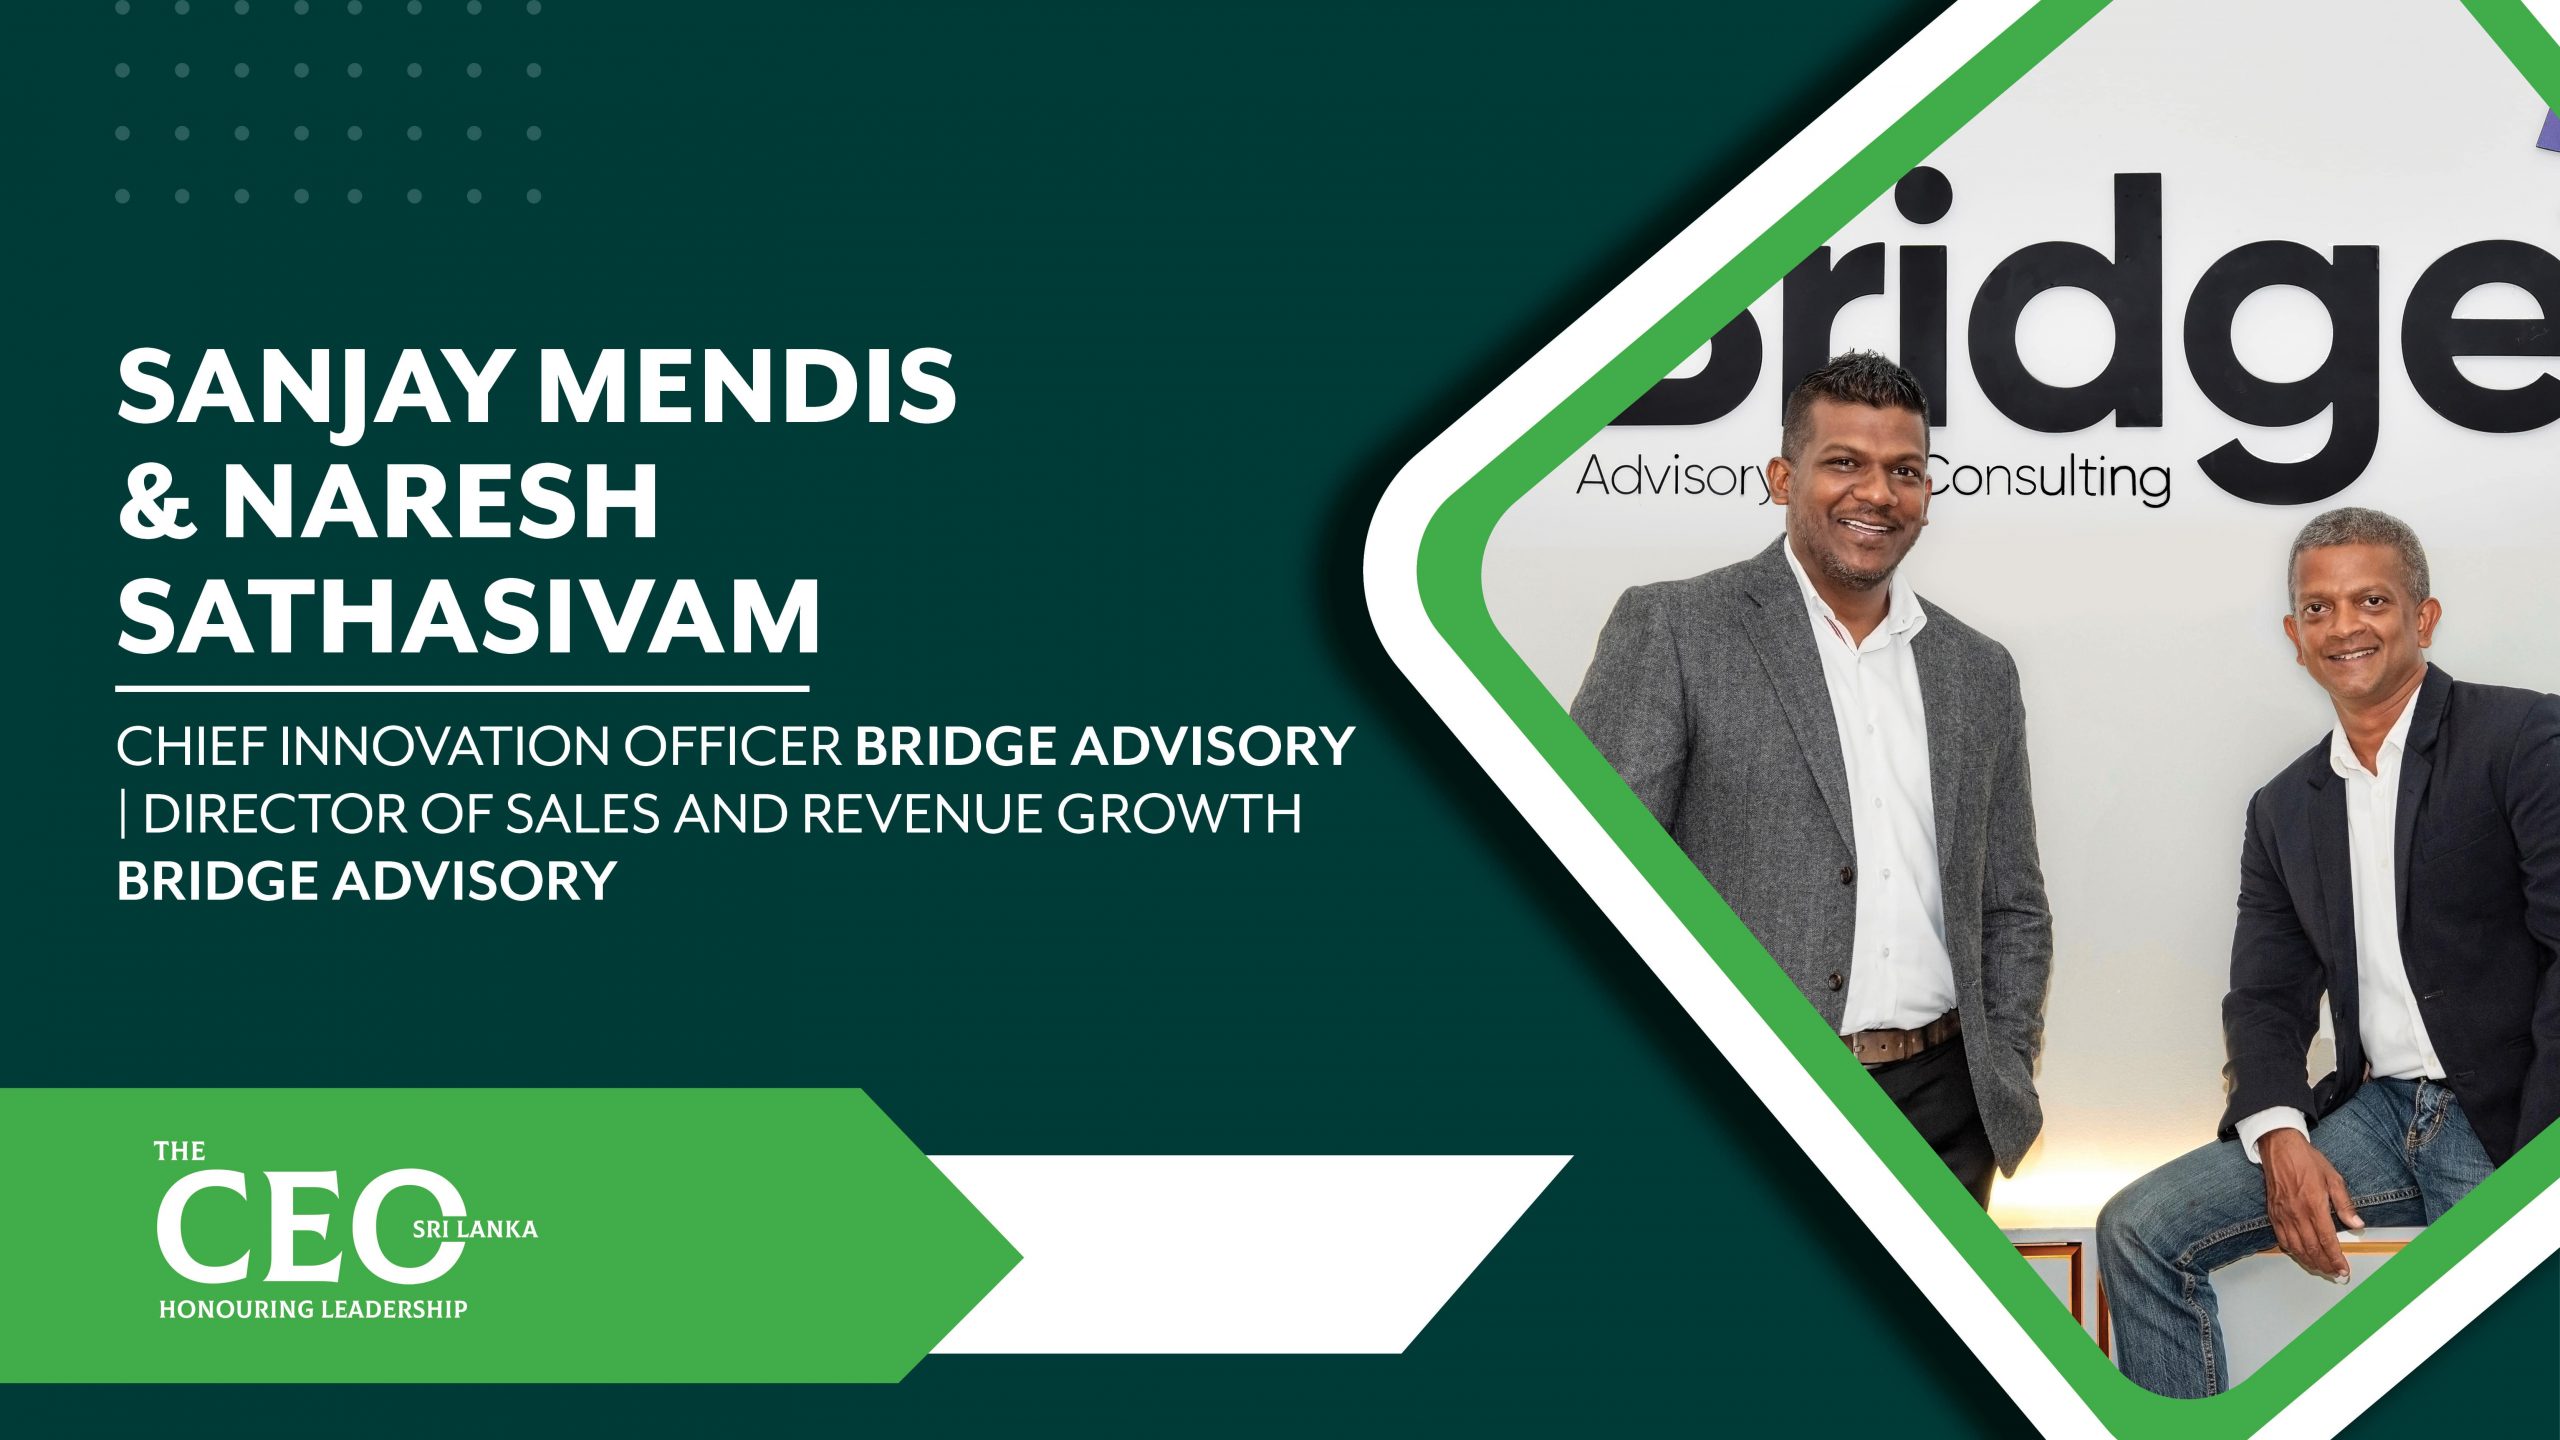 Specialists in Driving the ‘New Economy’ in Sri Lanka – Sanjay Mendis, the Chief Innovation Officer, and Naresh Sathasivam, the Director of Sales & Revenue Growth, of Bridge Advisory and Consulting